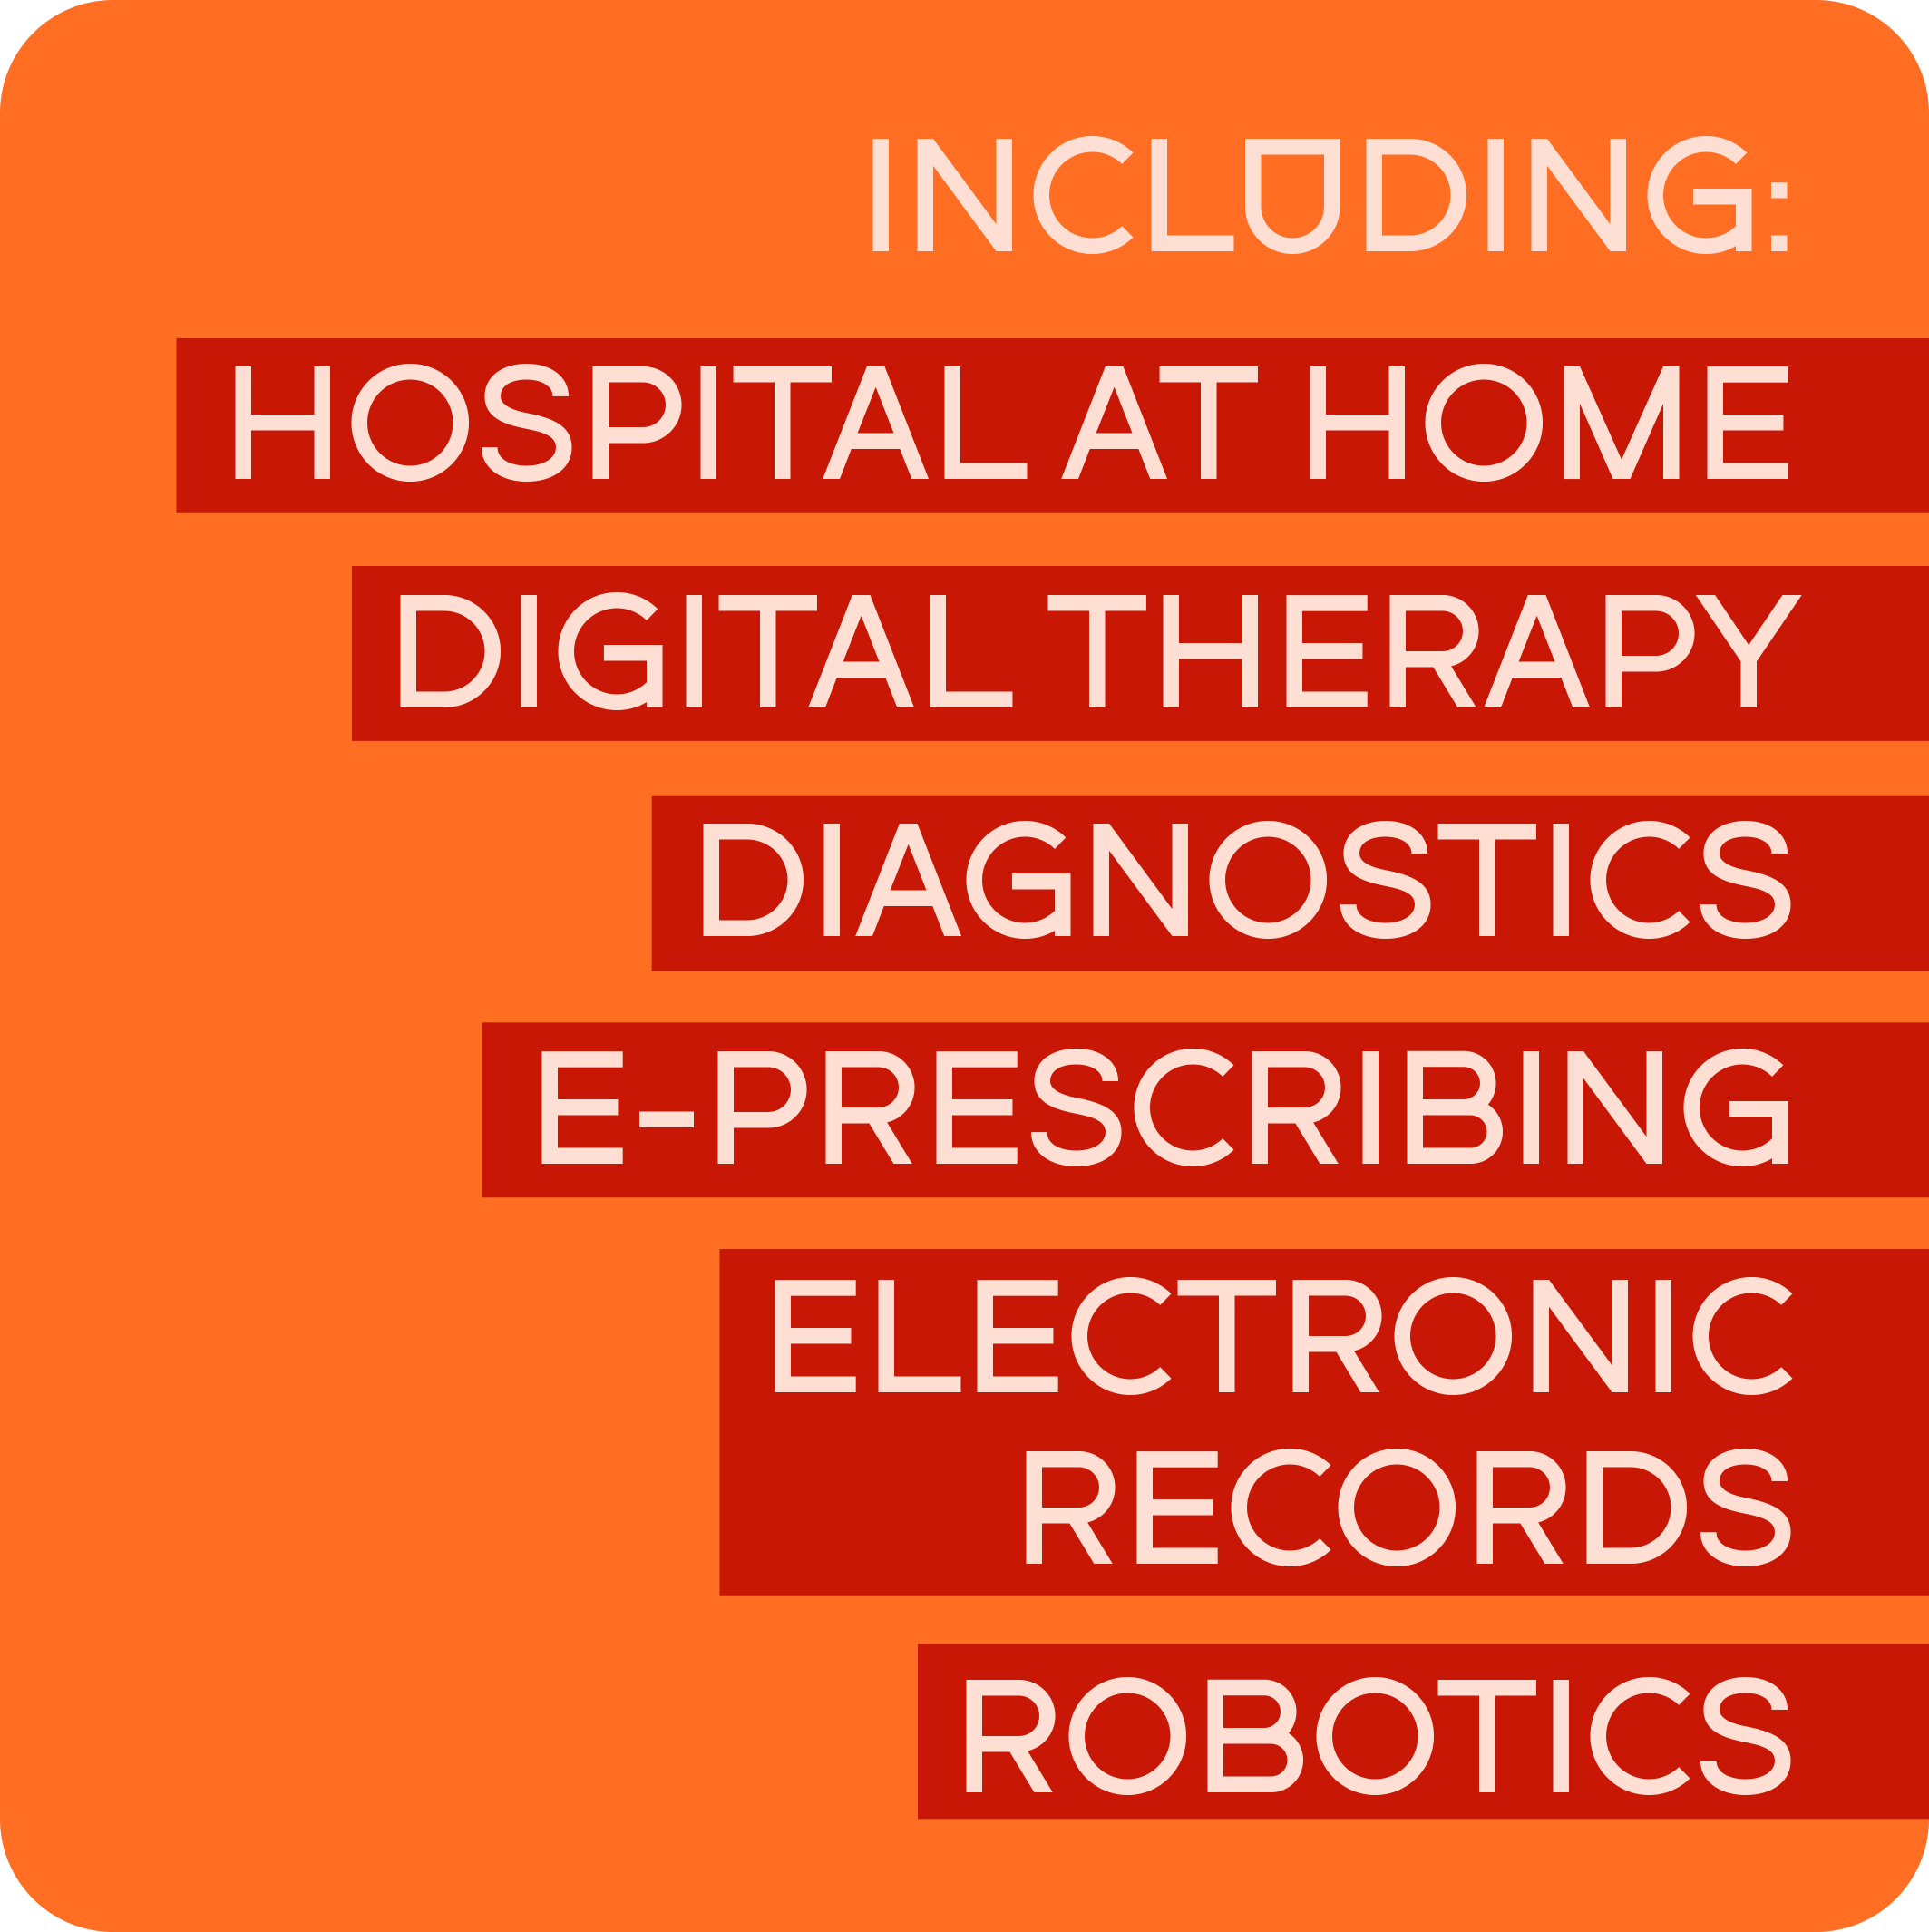 List of what is included in Healthcare Technology